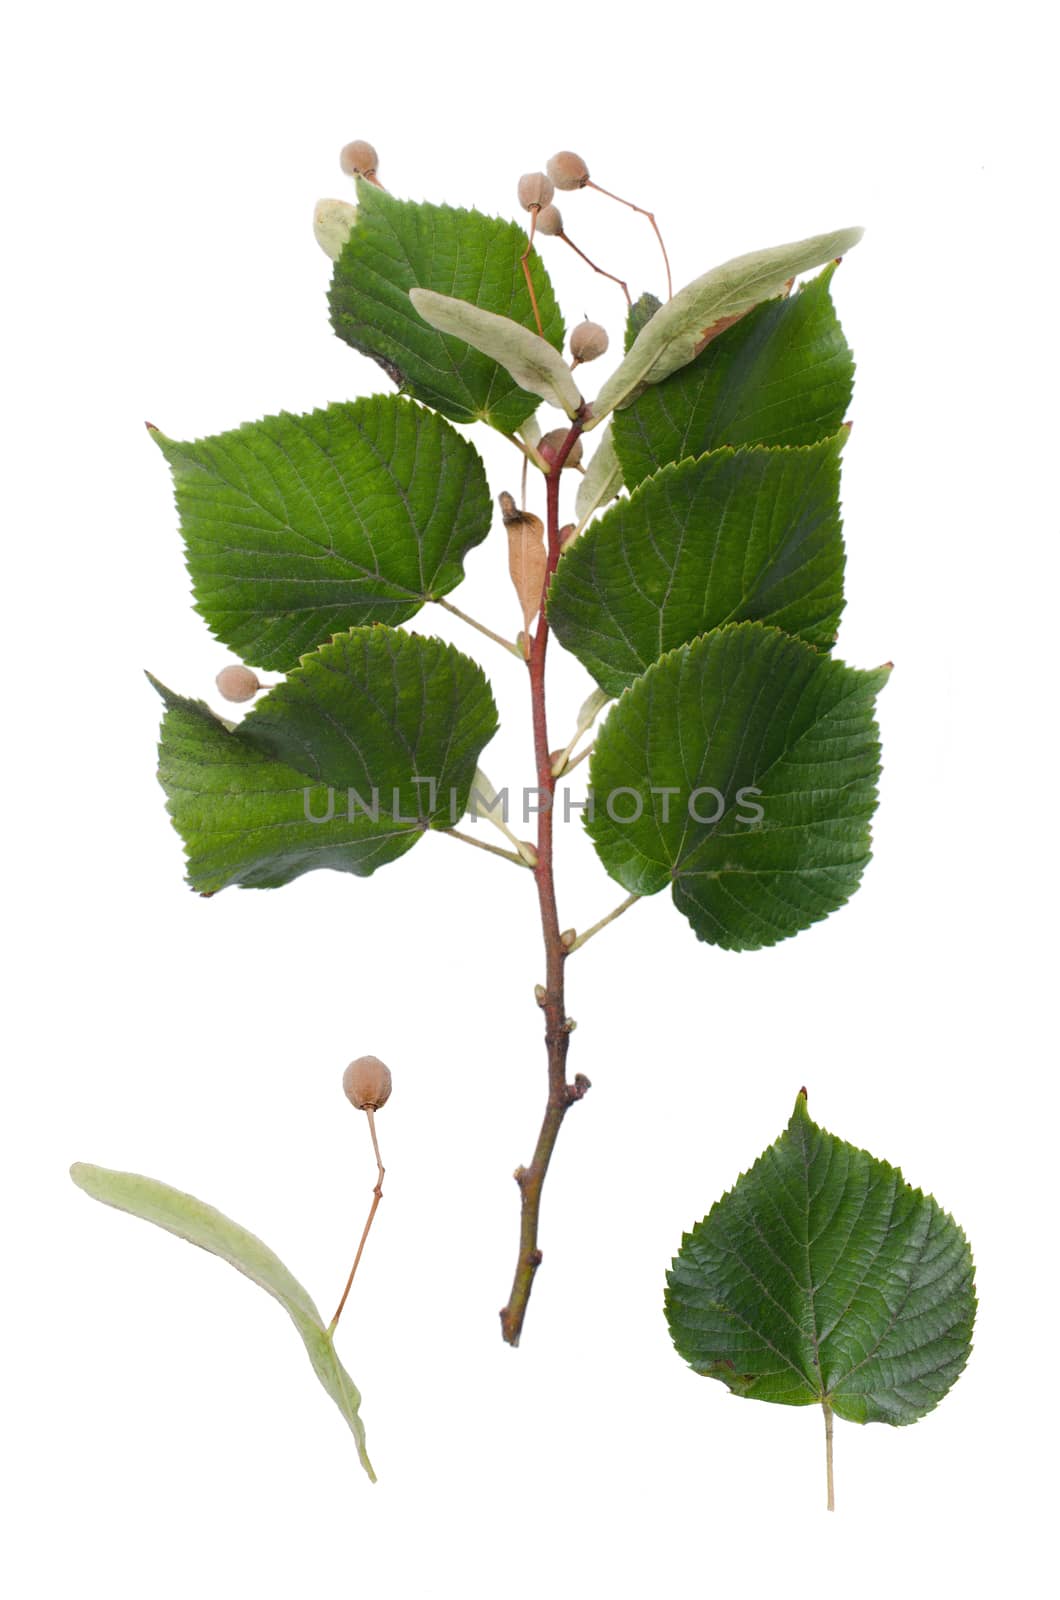 Basswood twig and detail of leaf isolated on white background.